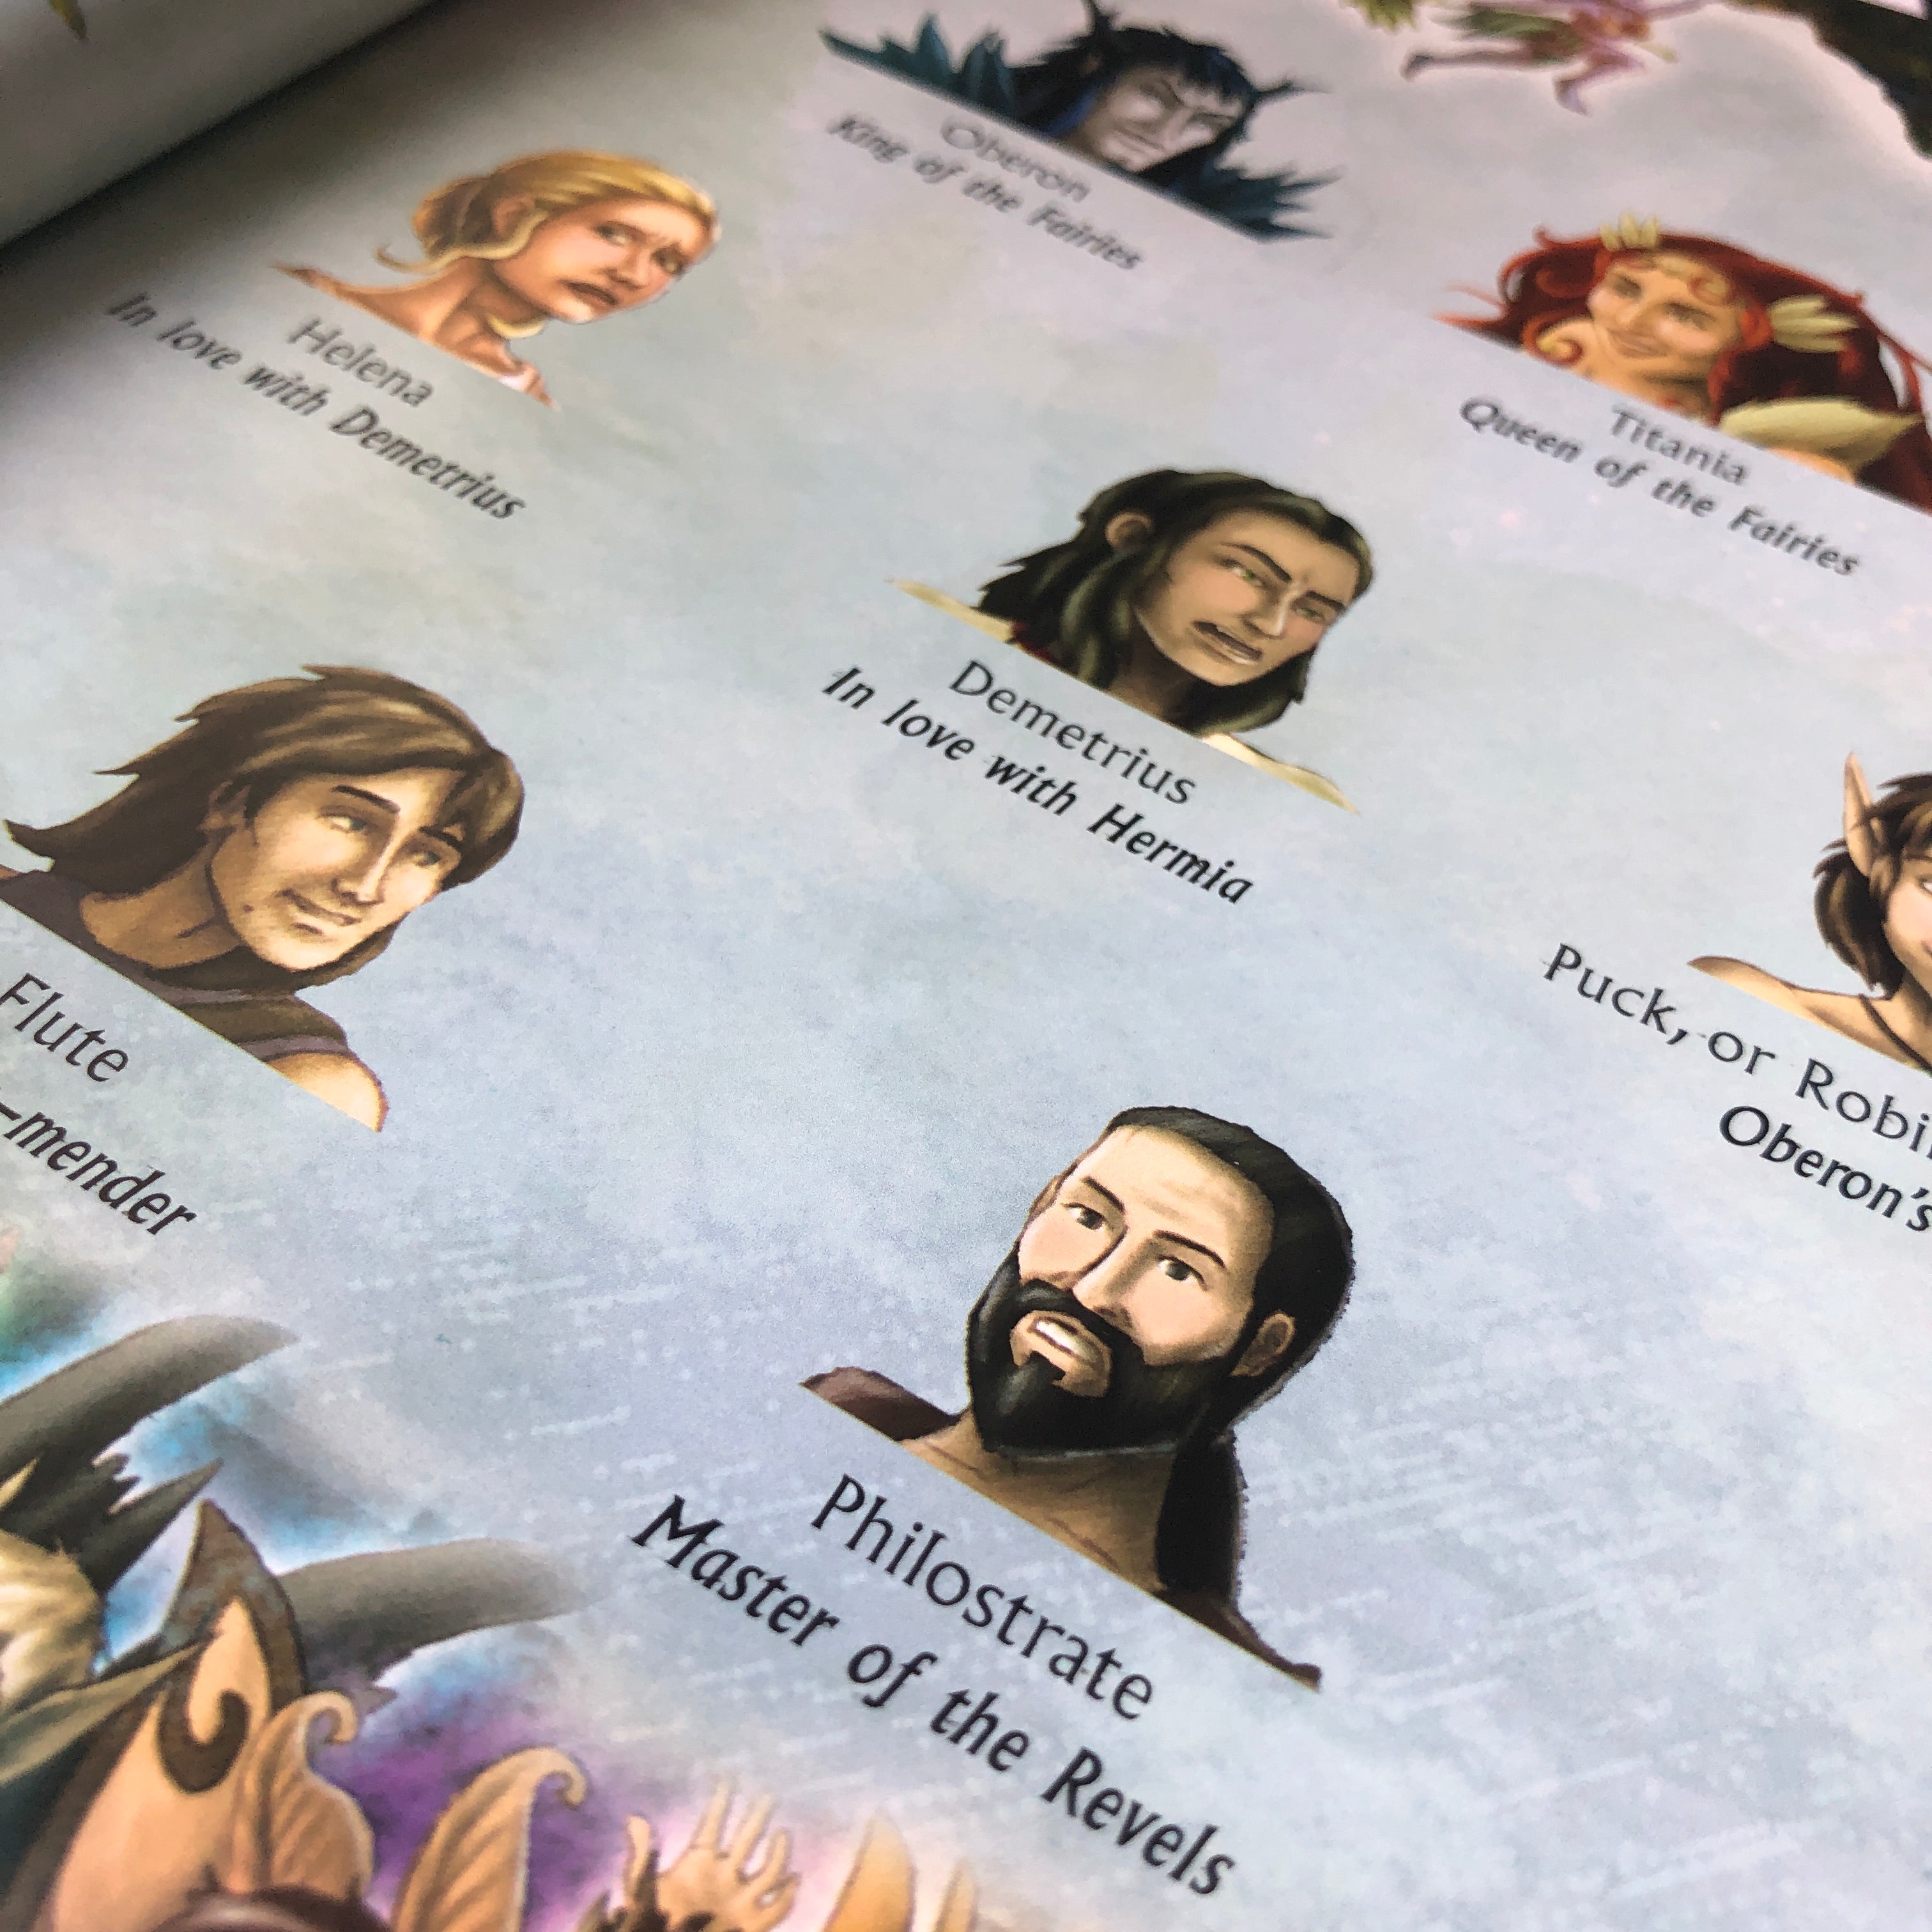 A close up image of the Dramatis Personae showing various characters from A Midsummer Night's Dream.